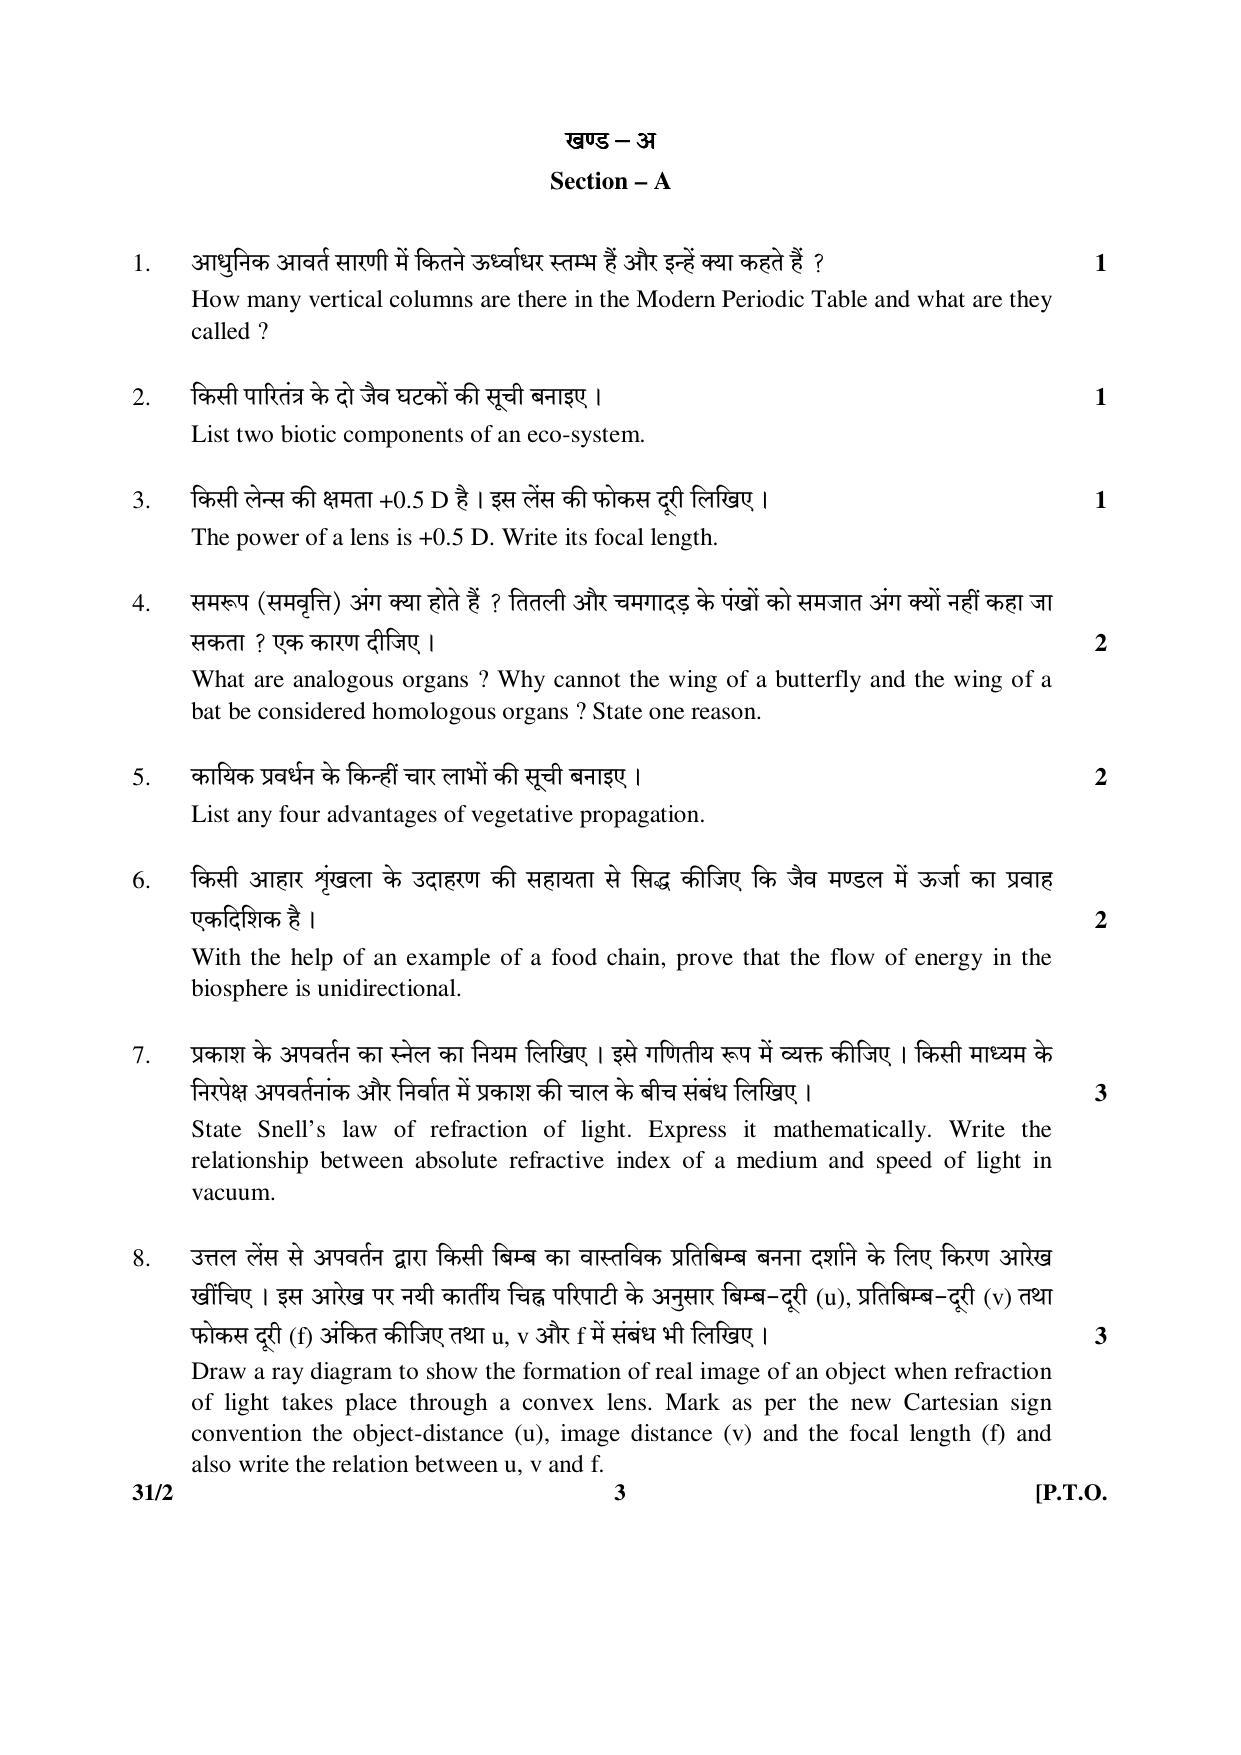 CBSE Class 10 31-2 (Science) 2017-comptt Question Paper - Page 3